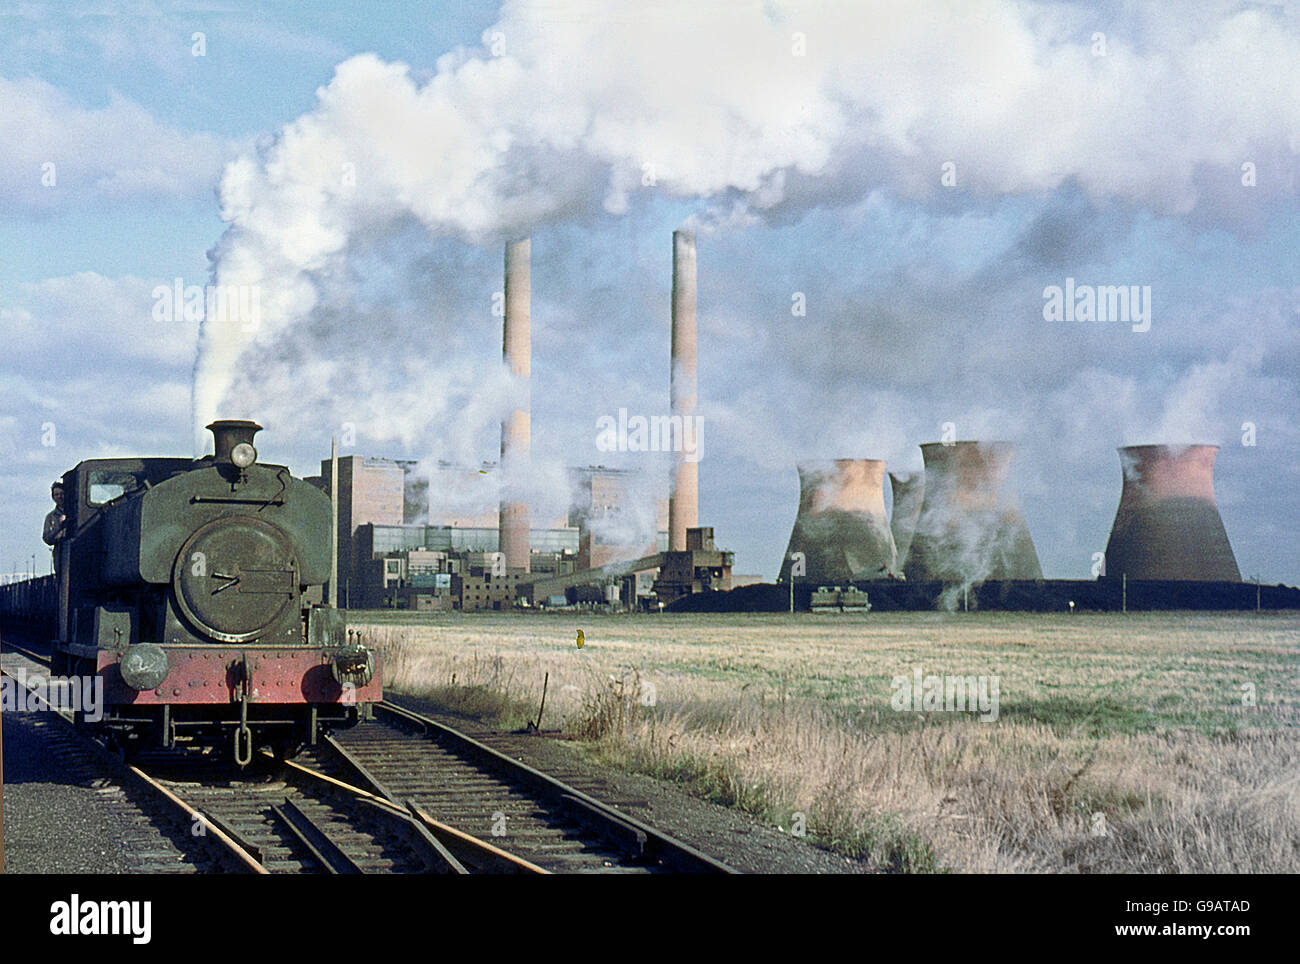 A blustery autumn day at Goldington Power Station, south of Bedford, with Andrew Barclay 0-4-0ST ED No. 9 at work. Stock Photo